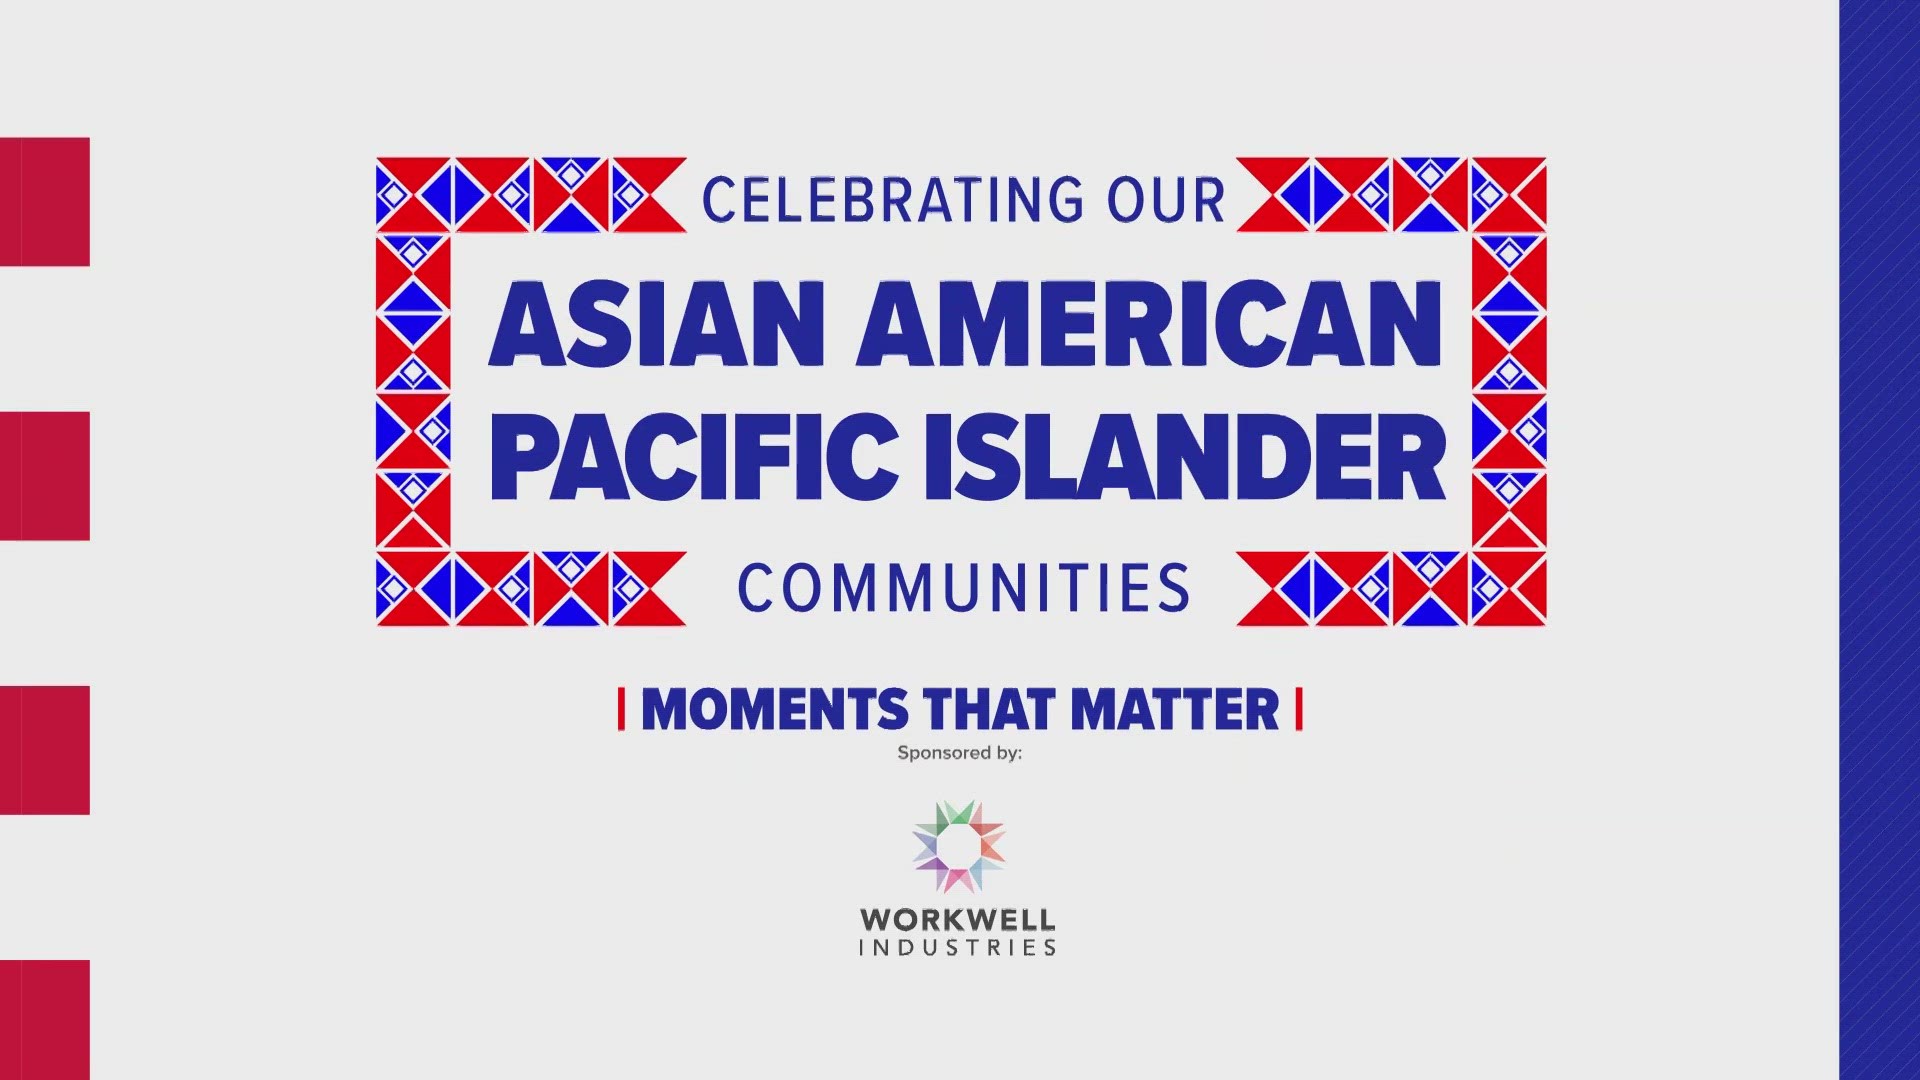 After years of proclaiming May as AAPI Heritage Month by way of annual presidential proclamations, a 1992 Act of Congress put it on the calendar permanently.